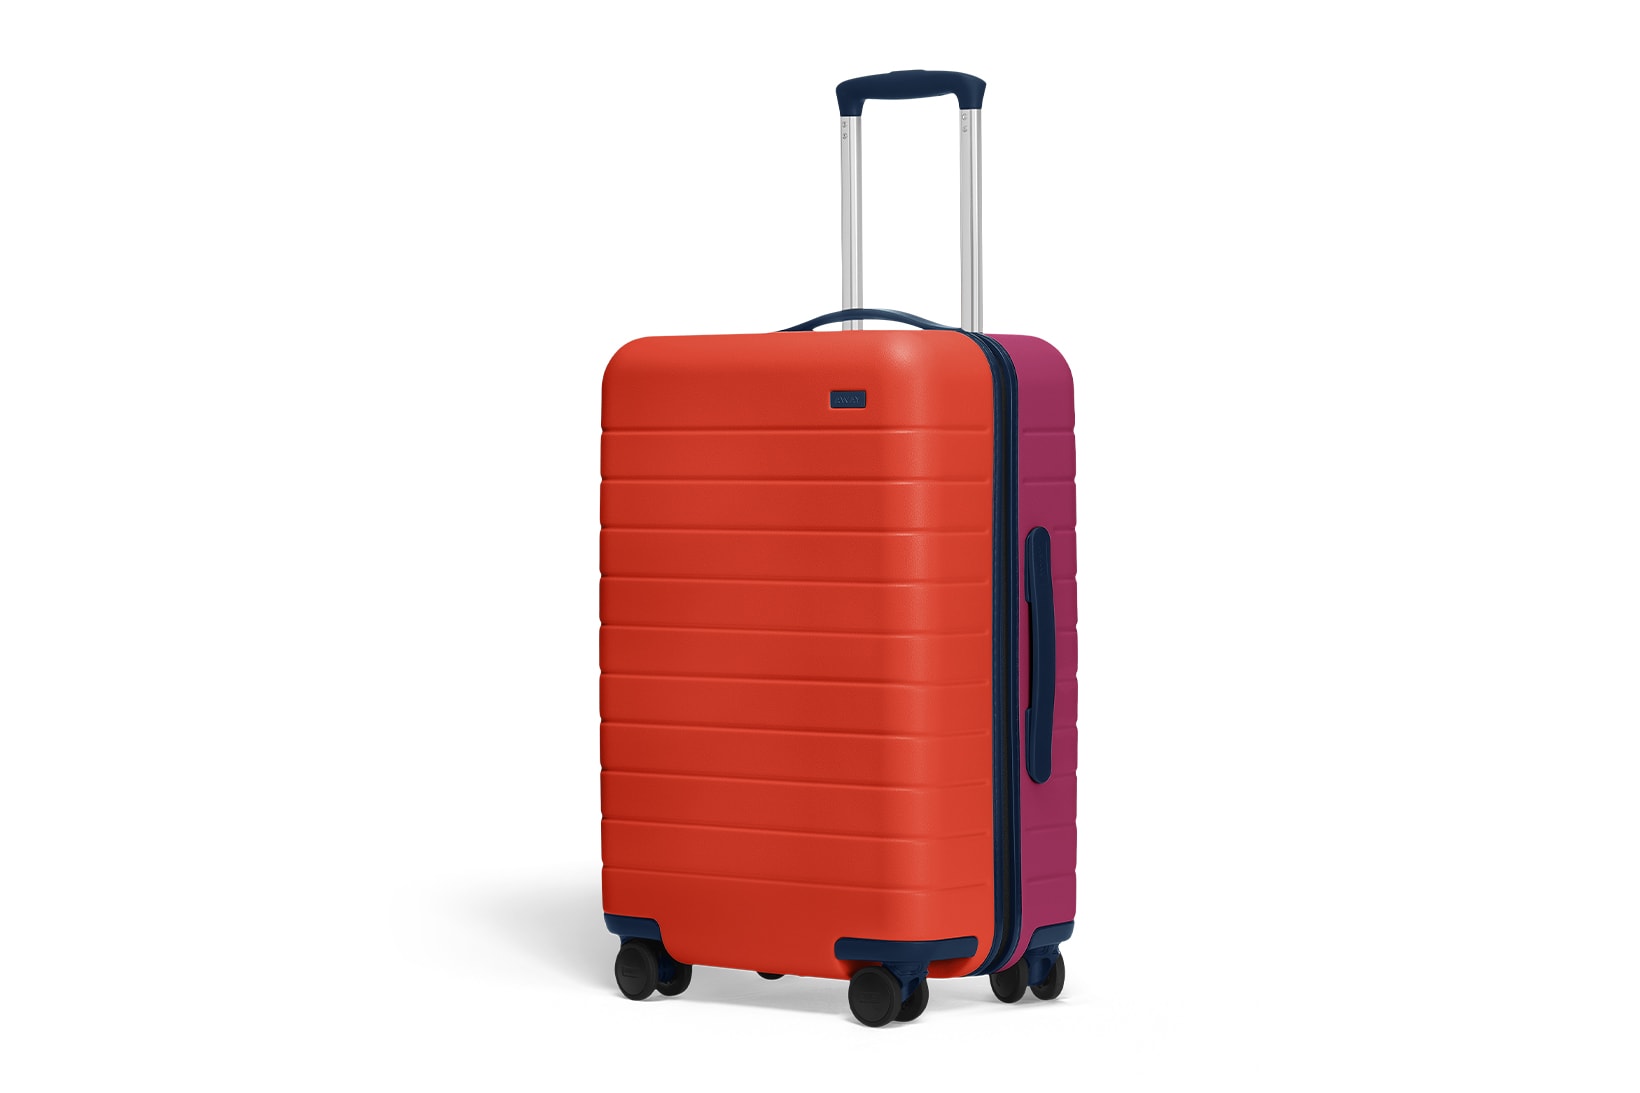 away technicolor collection suitcases the bigger carry on bloom